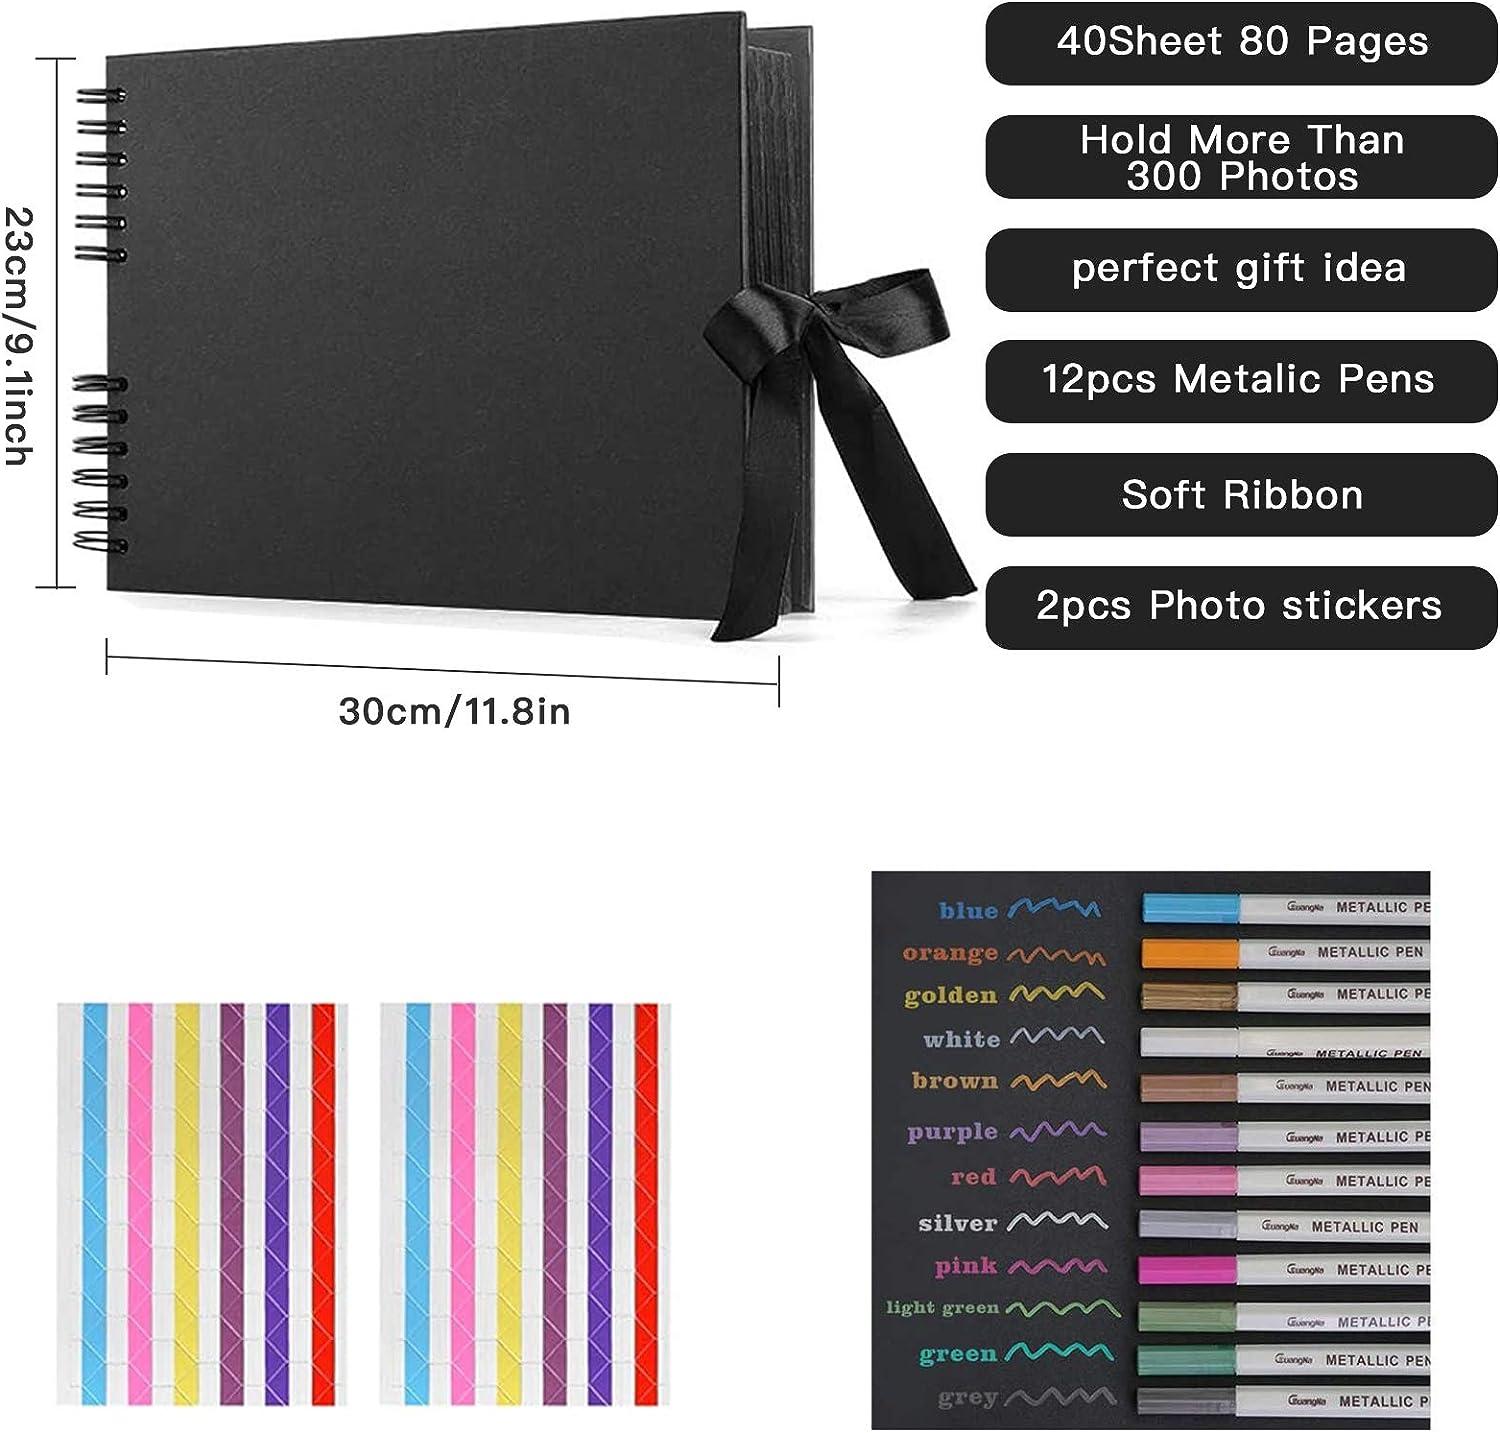 EVNEED 11.5 x 8.5 Inch Scrapbook Photo Album Wedding Guest Book Anniversary  Memory Scrapbooking Wedding Photo Album with DIY Accessories Kit for Craft  Paper DIY Xmas Gift 80 Pages (40 Sheets) Black